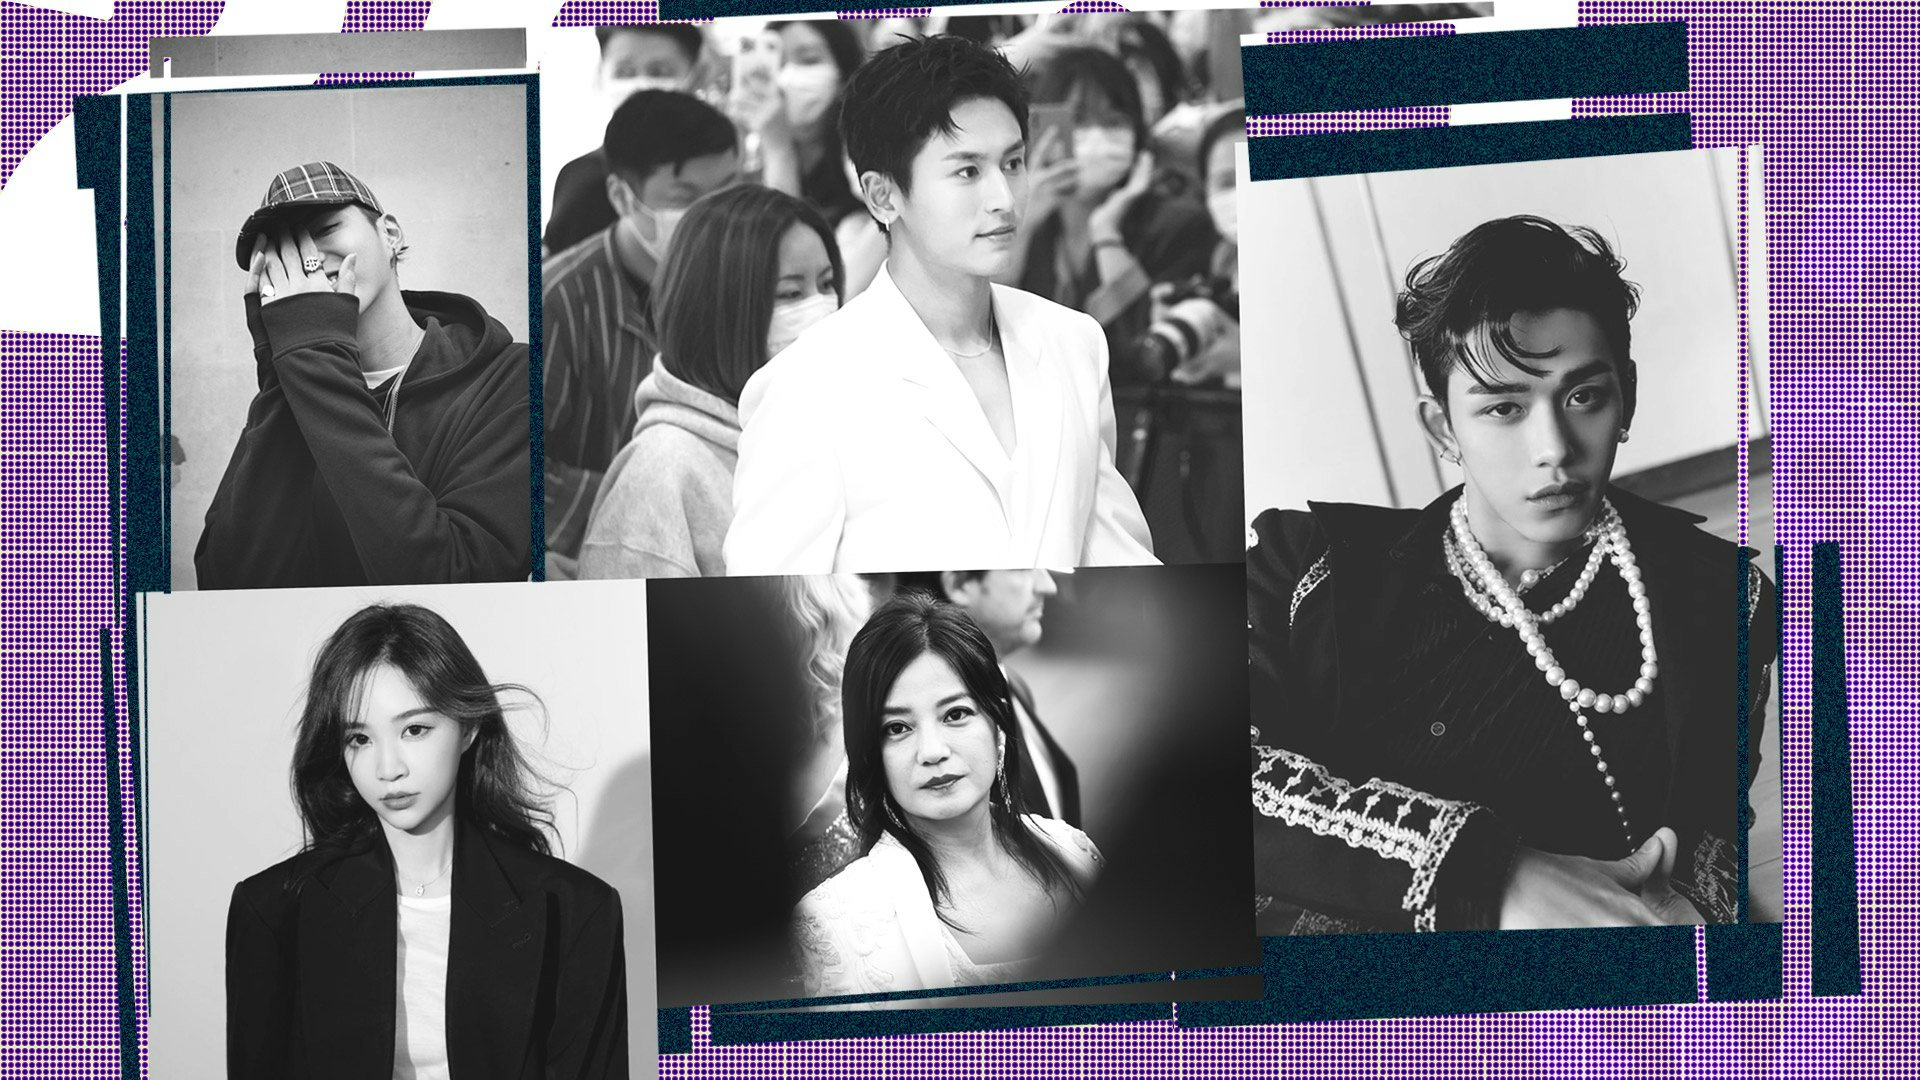 2021 was quite the year for celebrity controversies in China. Here, Jing Daily looks at the top moments of the year that has passed. Photo: Haitong Zheng